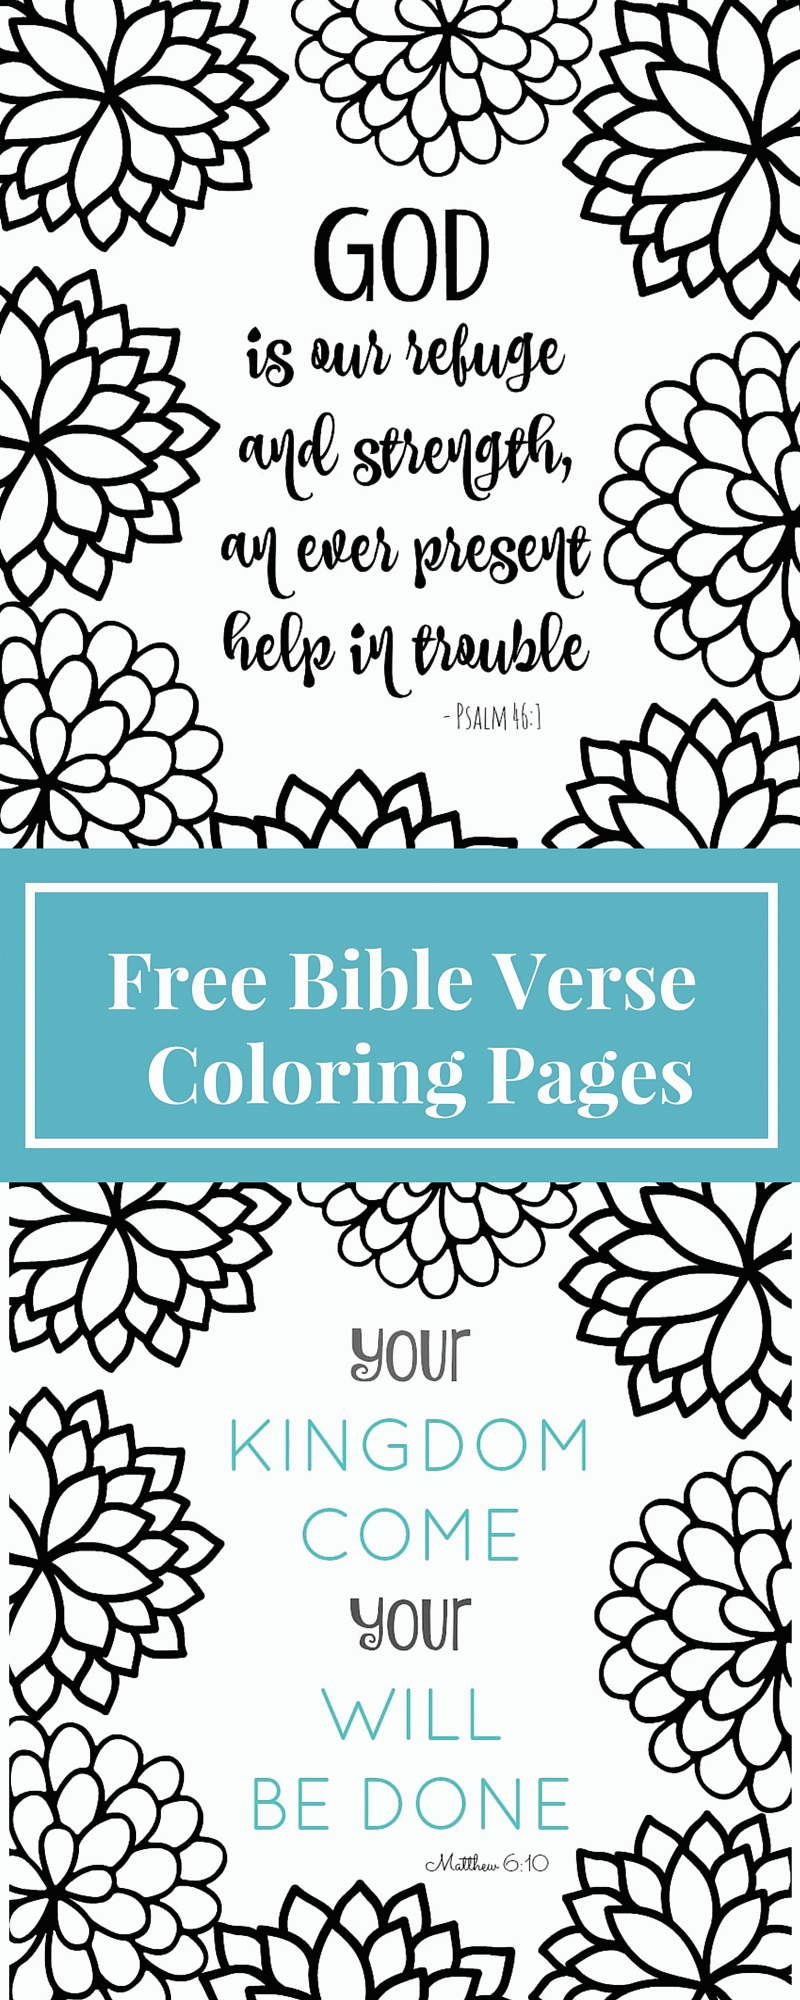 Free Printable Bible Verse Coloring Pages with Bursting Blossoms 